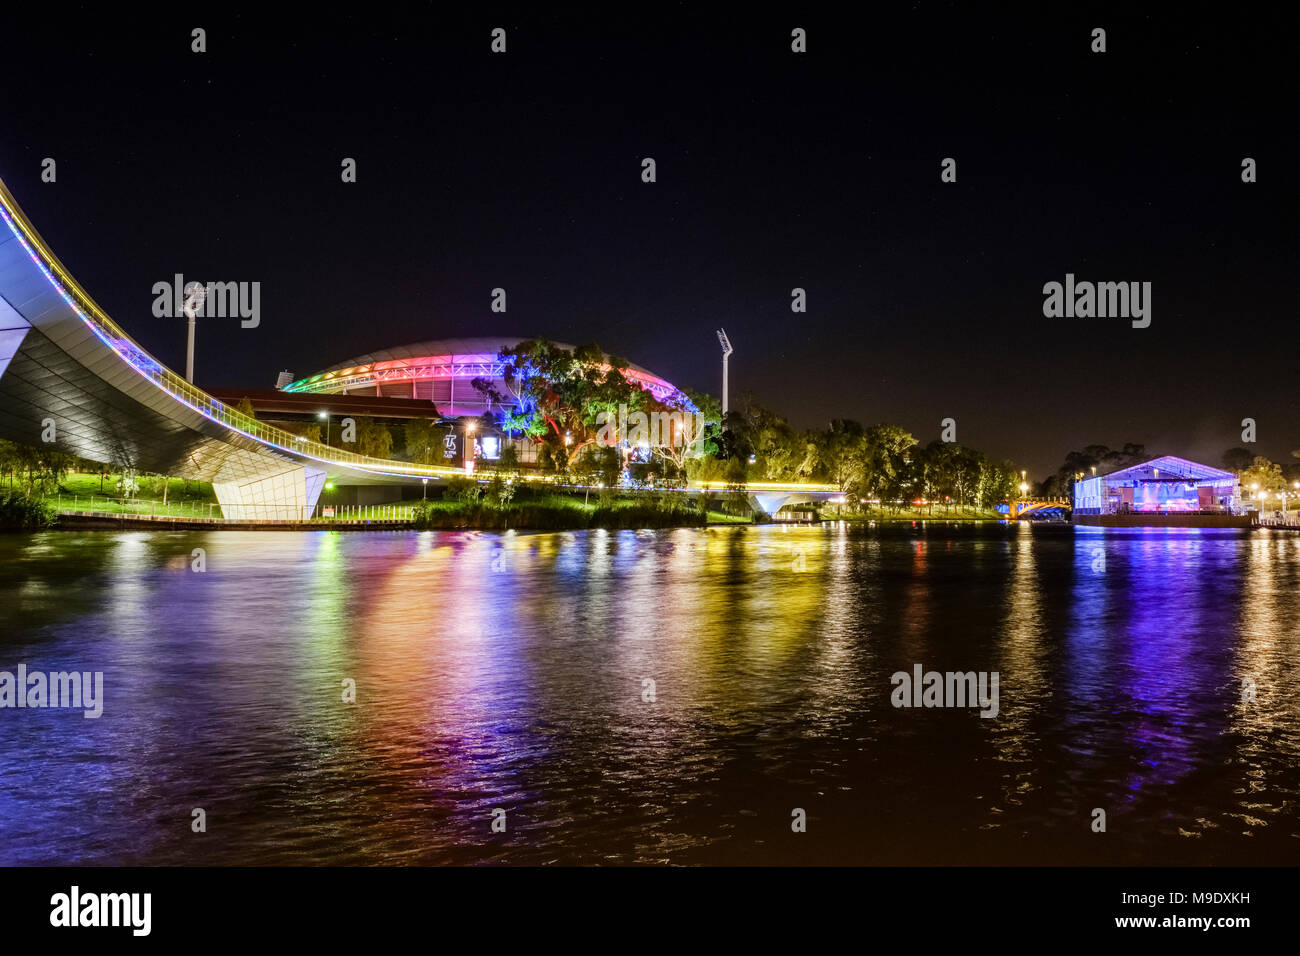 The lights of the Adelaide Oval, Festival Palais and footbridge reflect in the River Torrens at night. Stock Photo